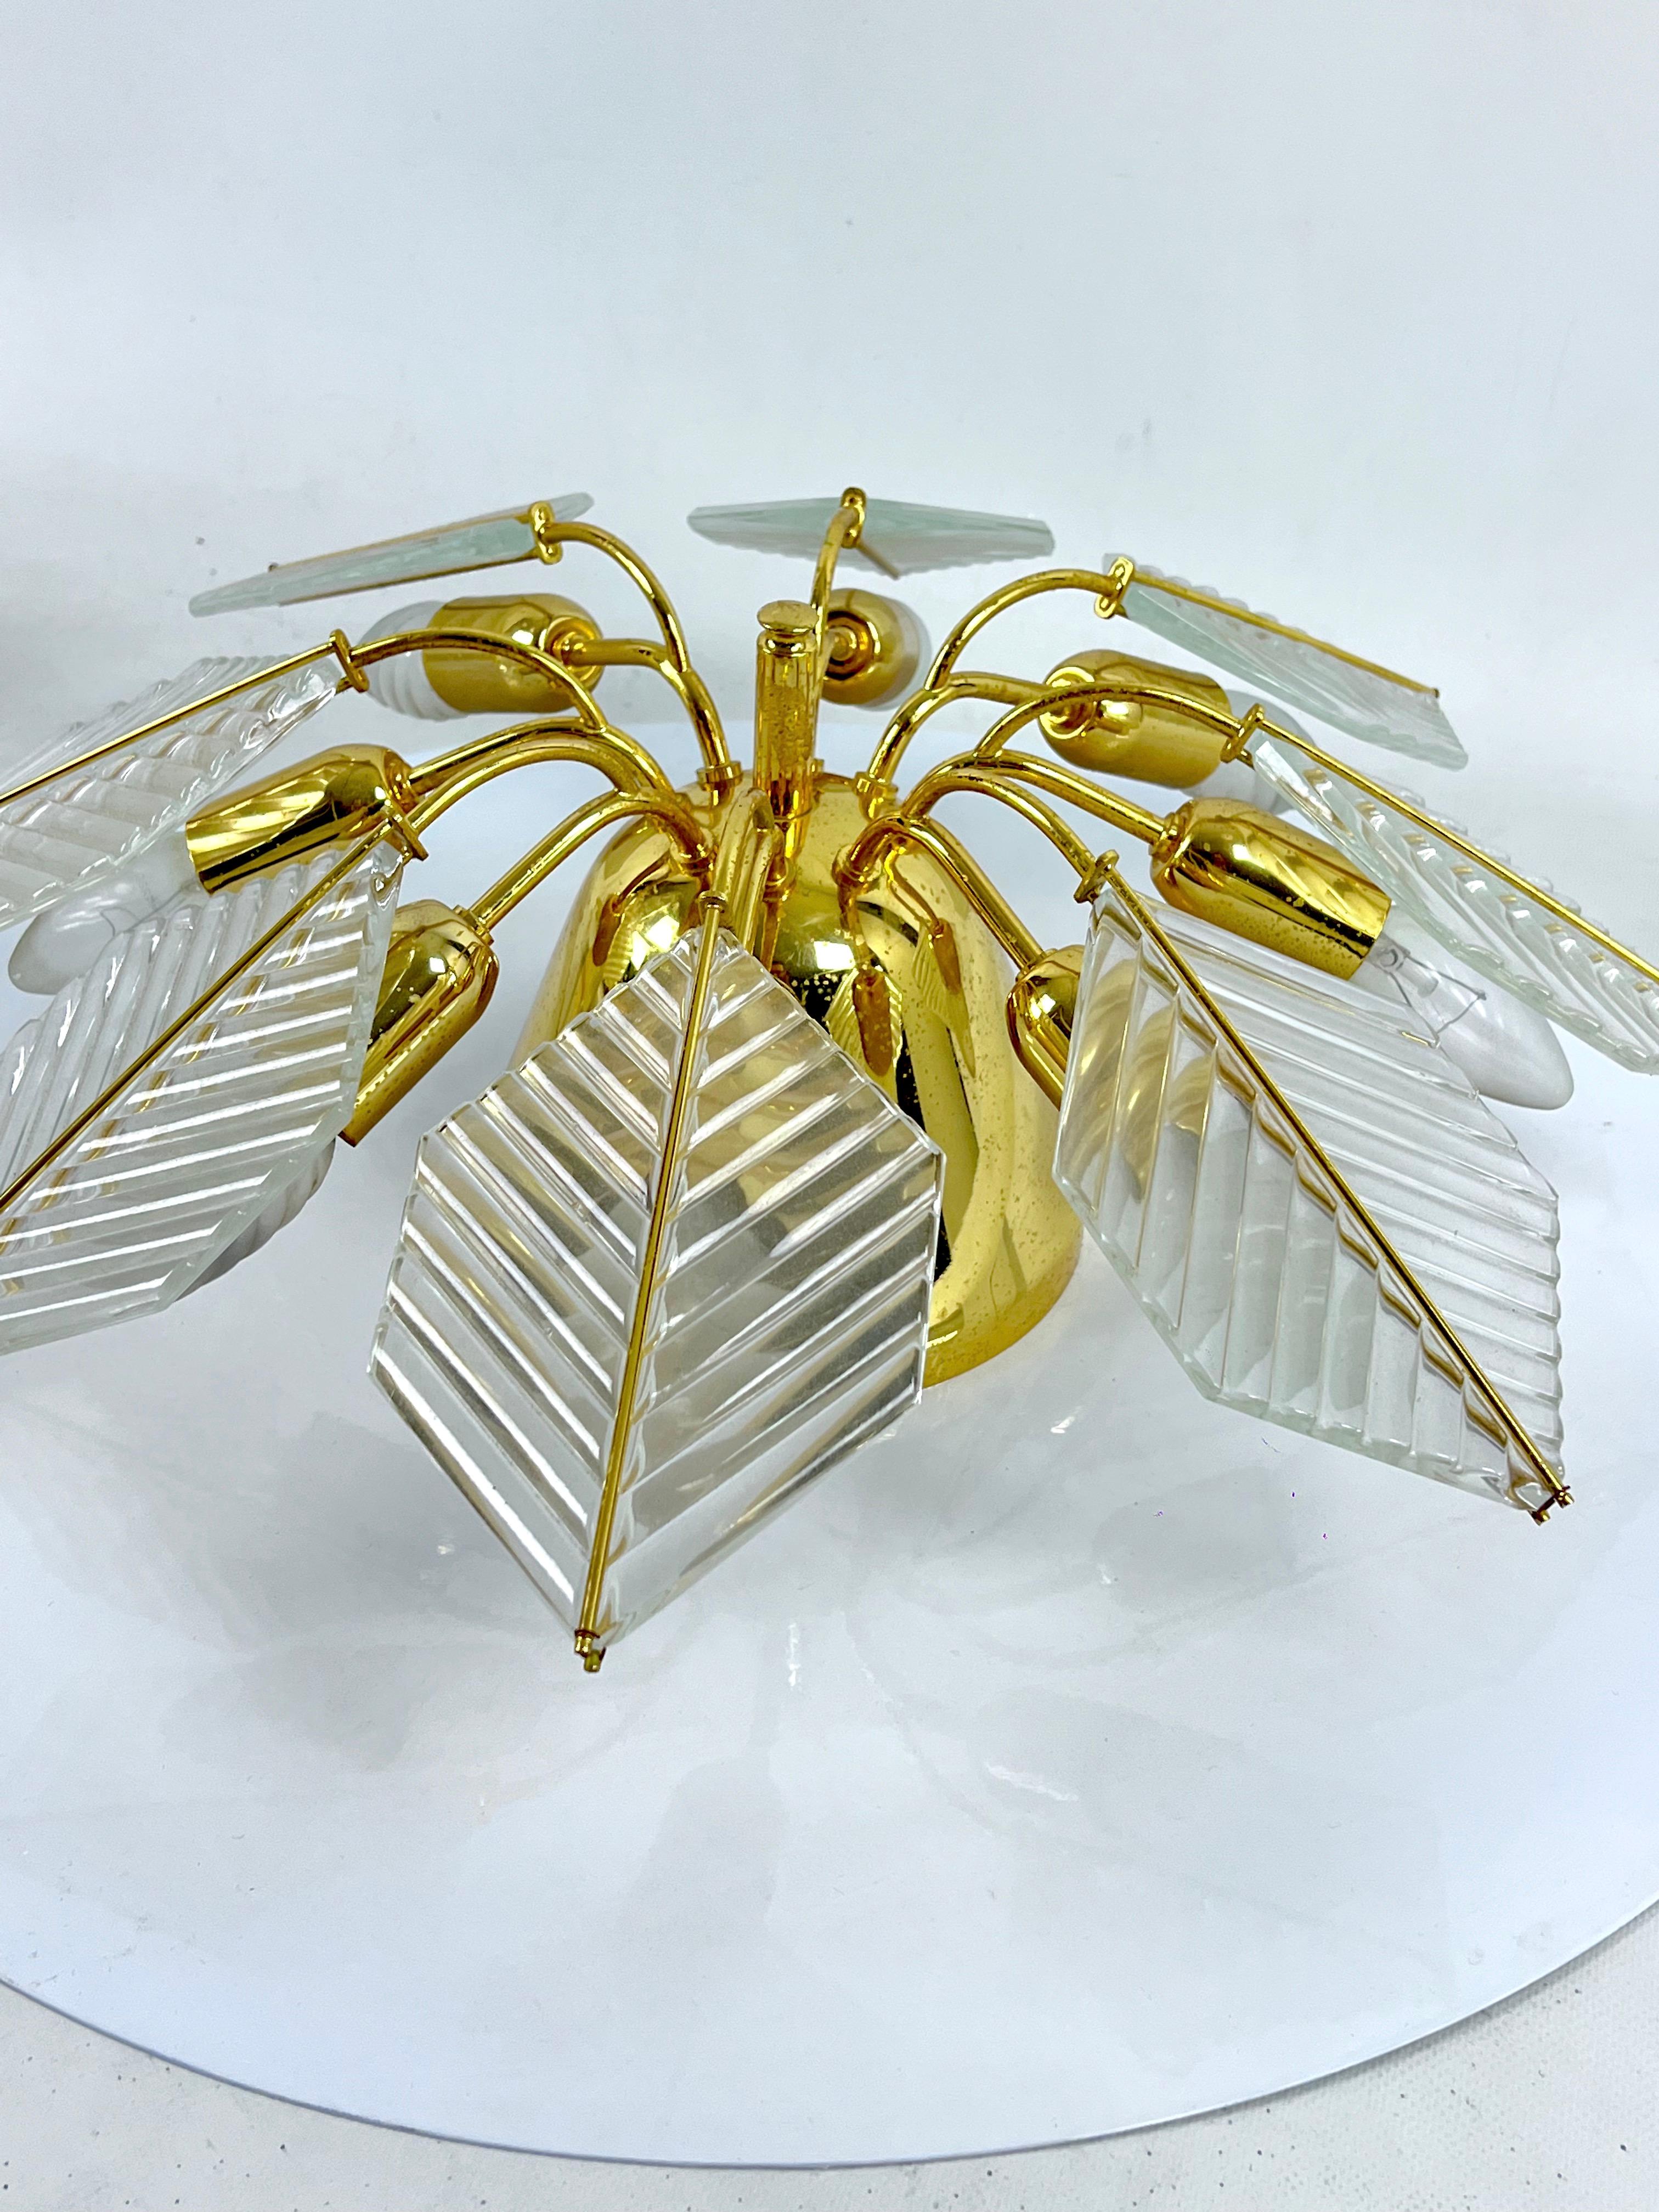 Italian Modern Pair of Brass Ceiling Lamps by Zero Quattro, 1970s For Sale 2